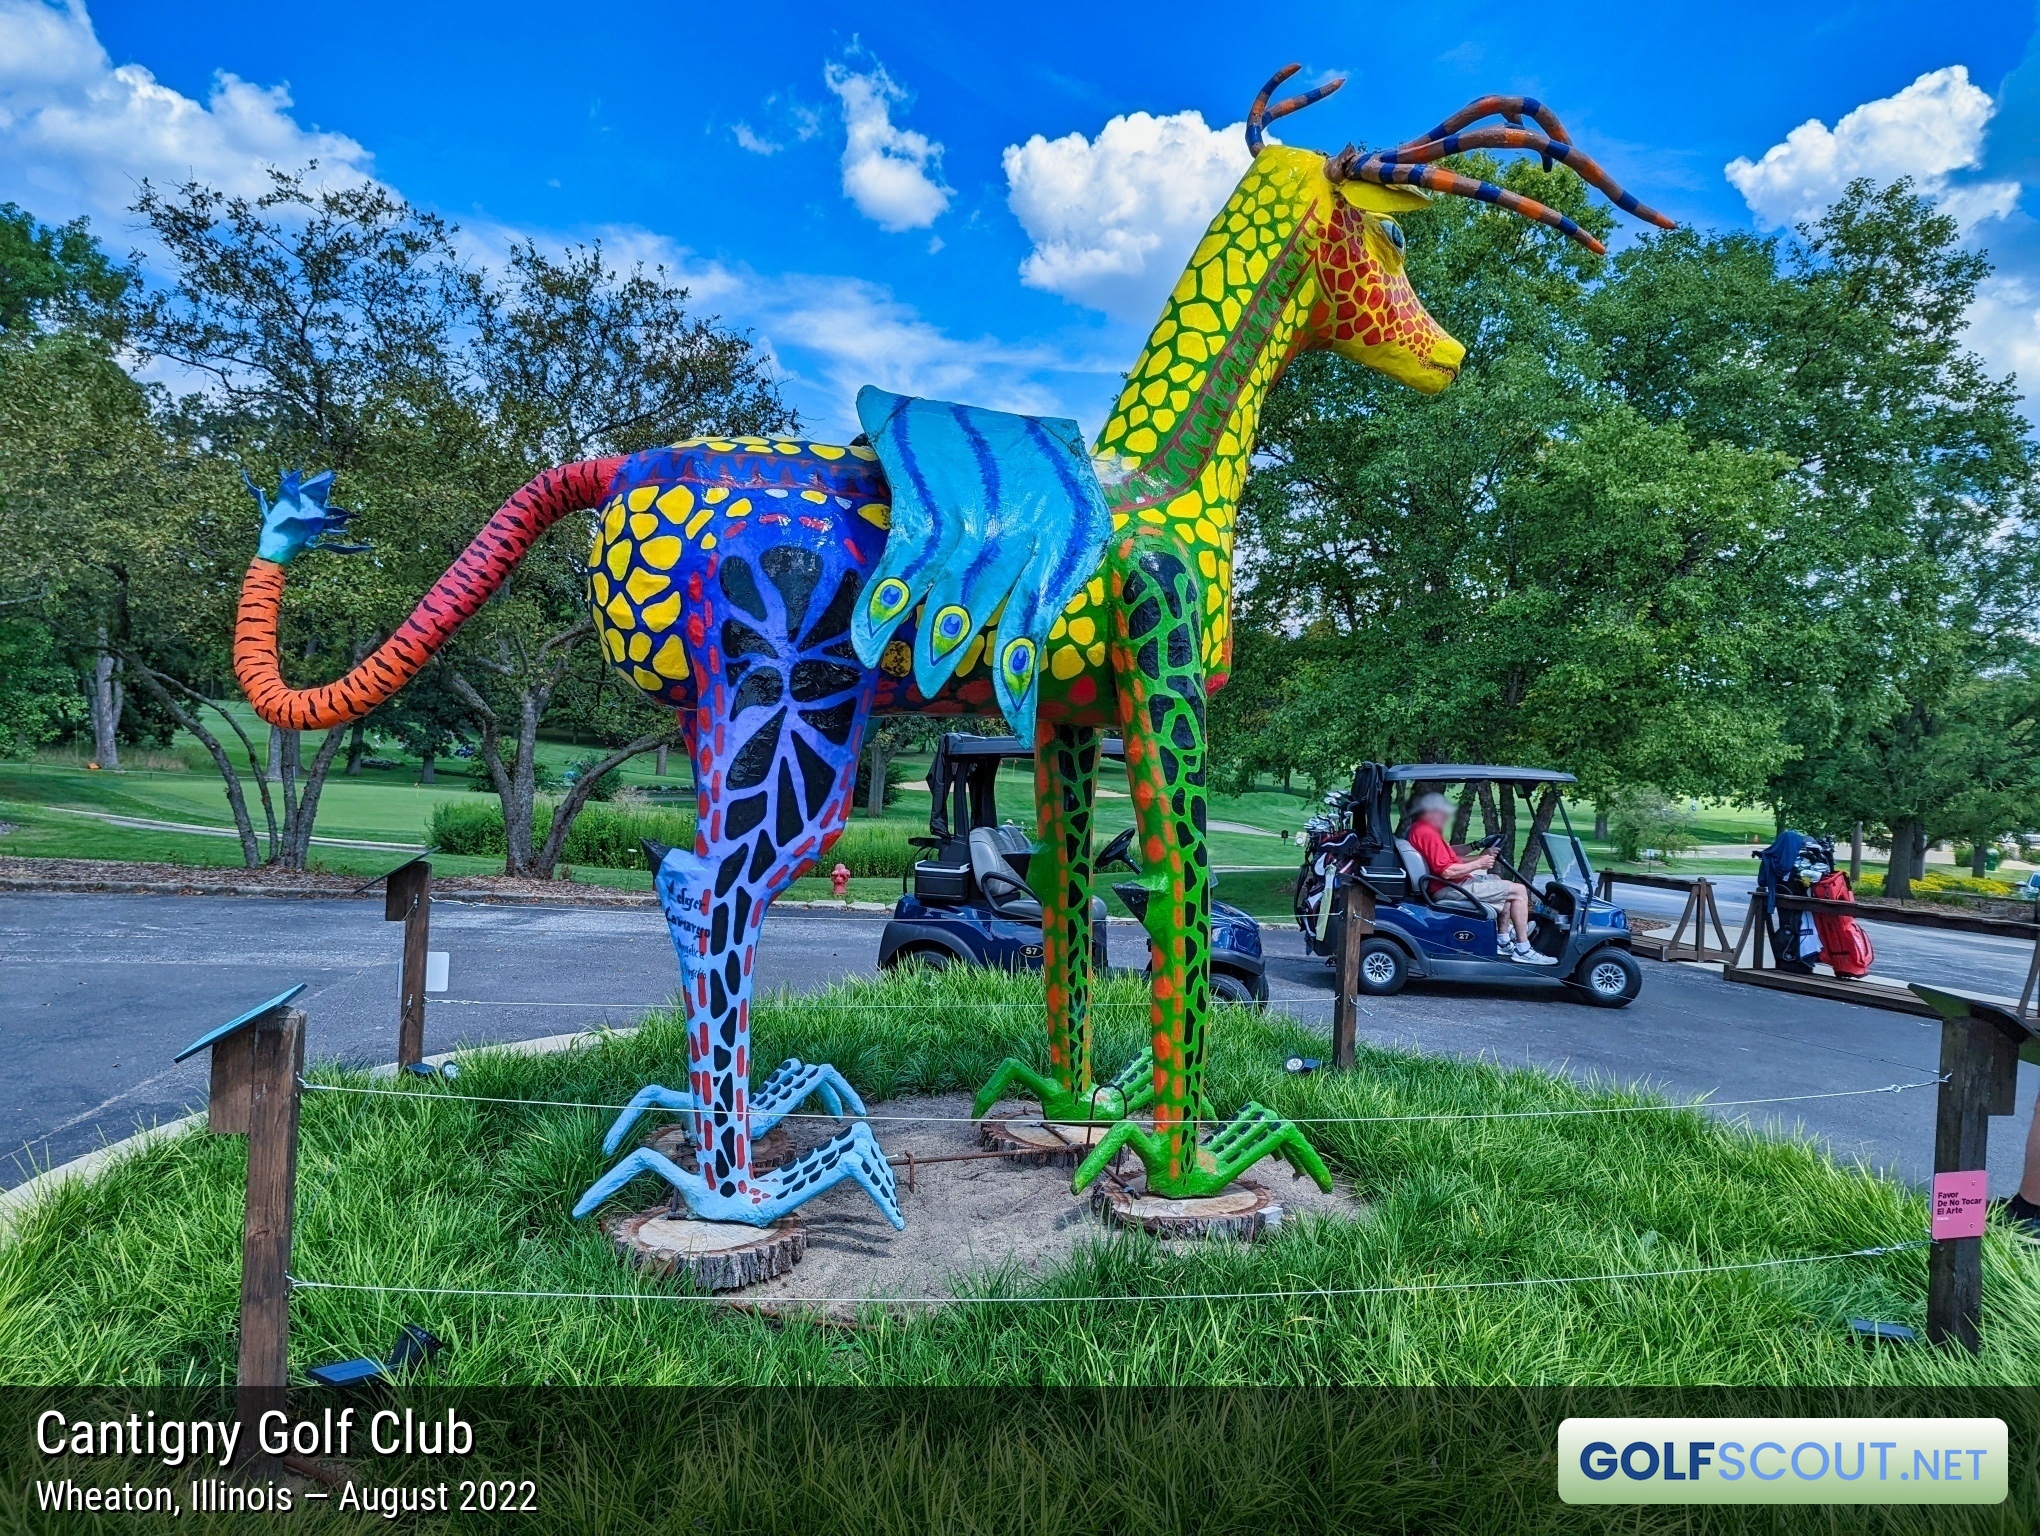 Miscellaneous photo of Cantigny Hillside Course in Wheaton, Illinois. This was part of an outdoor art exhibit featuring imaginary creatures inspired by Mexican folklore, entitled “Alebrijes: Creatures of a Dream World” and was on display through October 2022.
